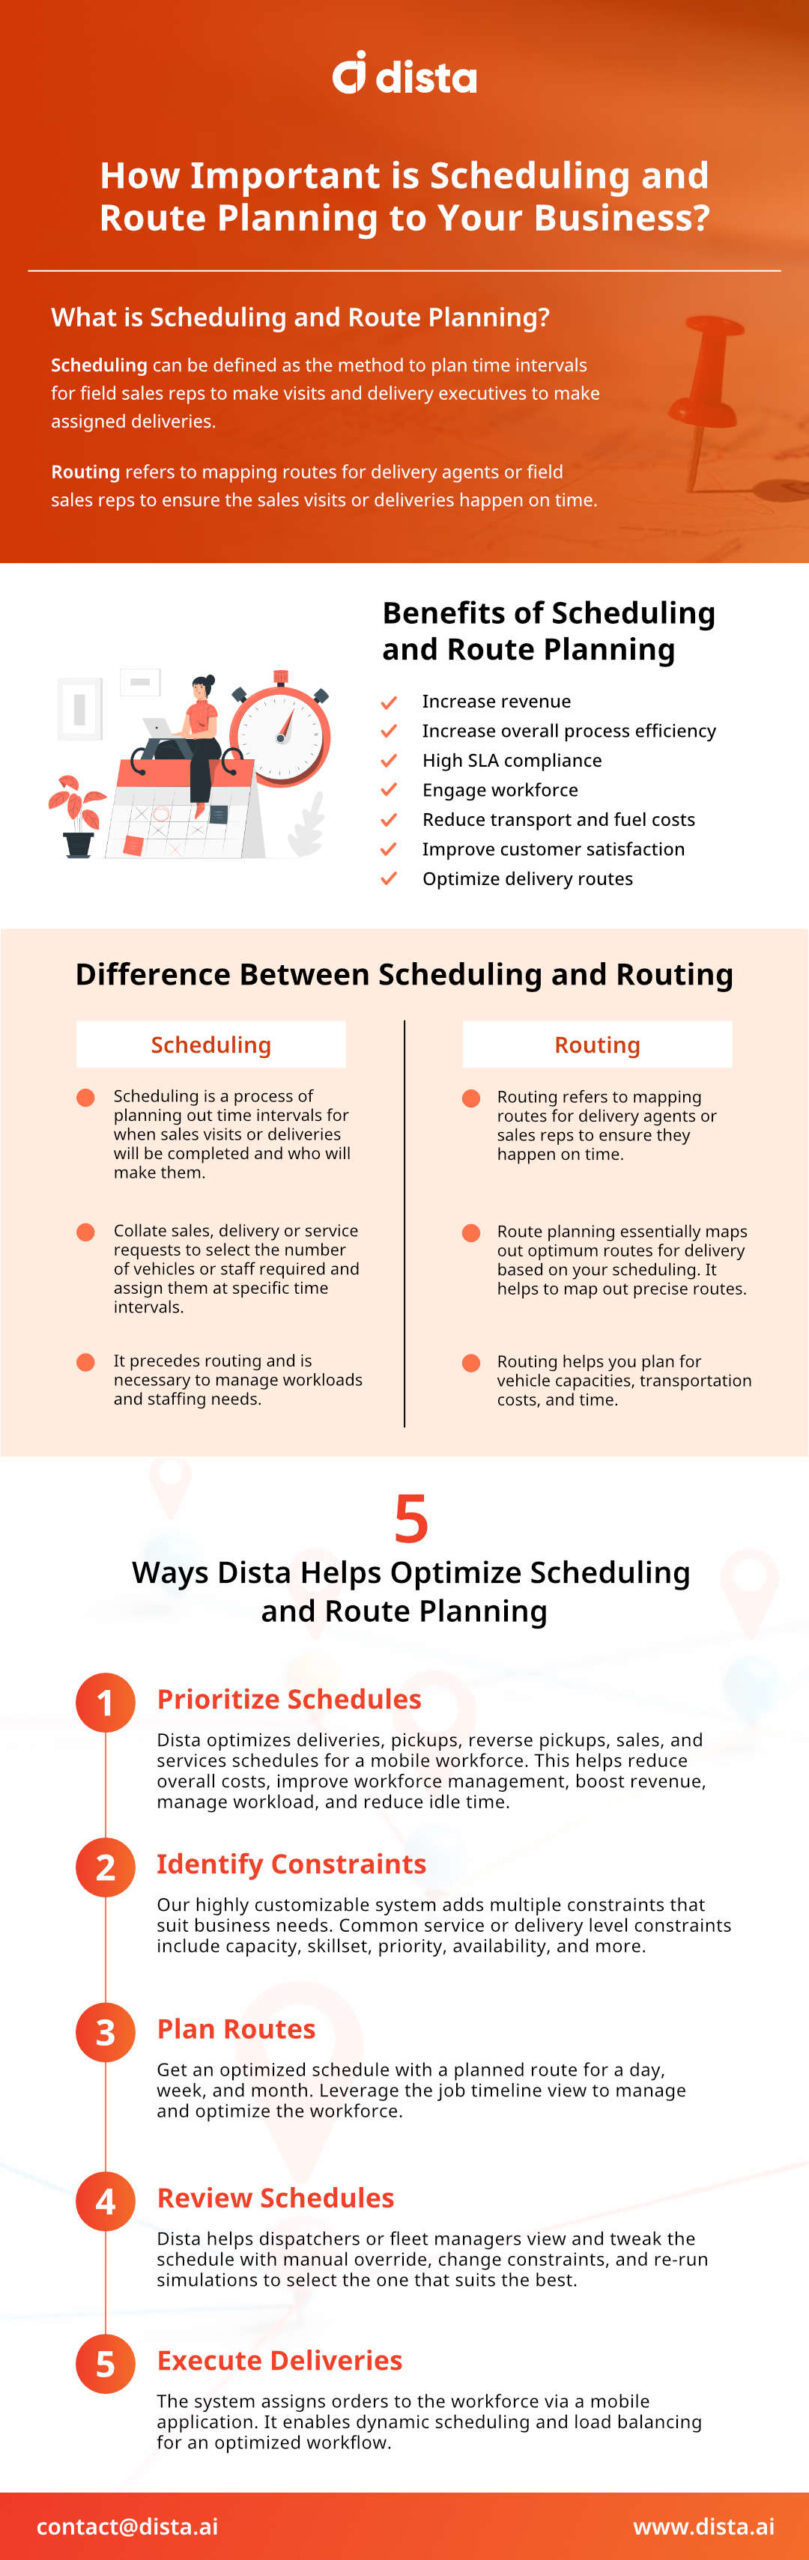 How Important is Scheduling and Route Planning to Your Business